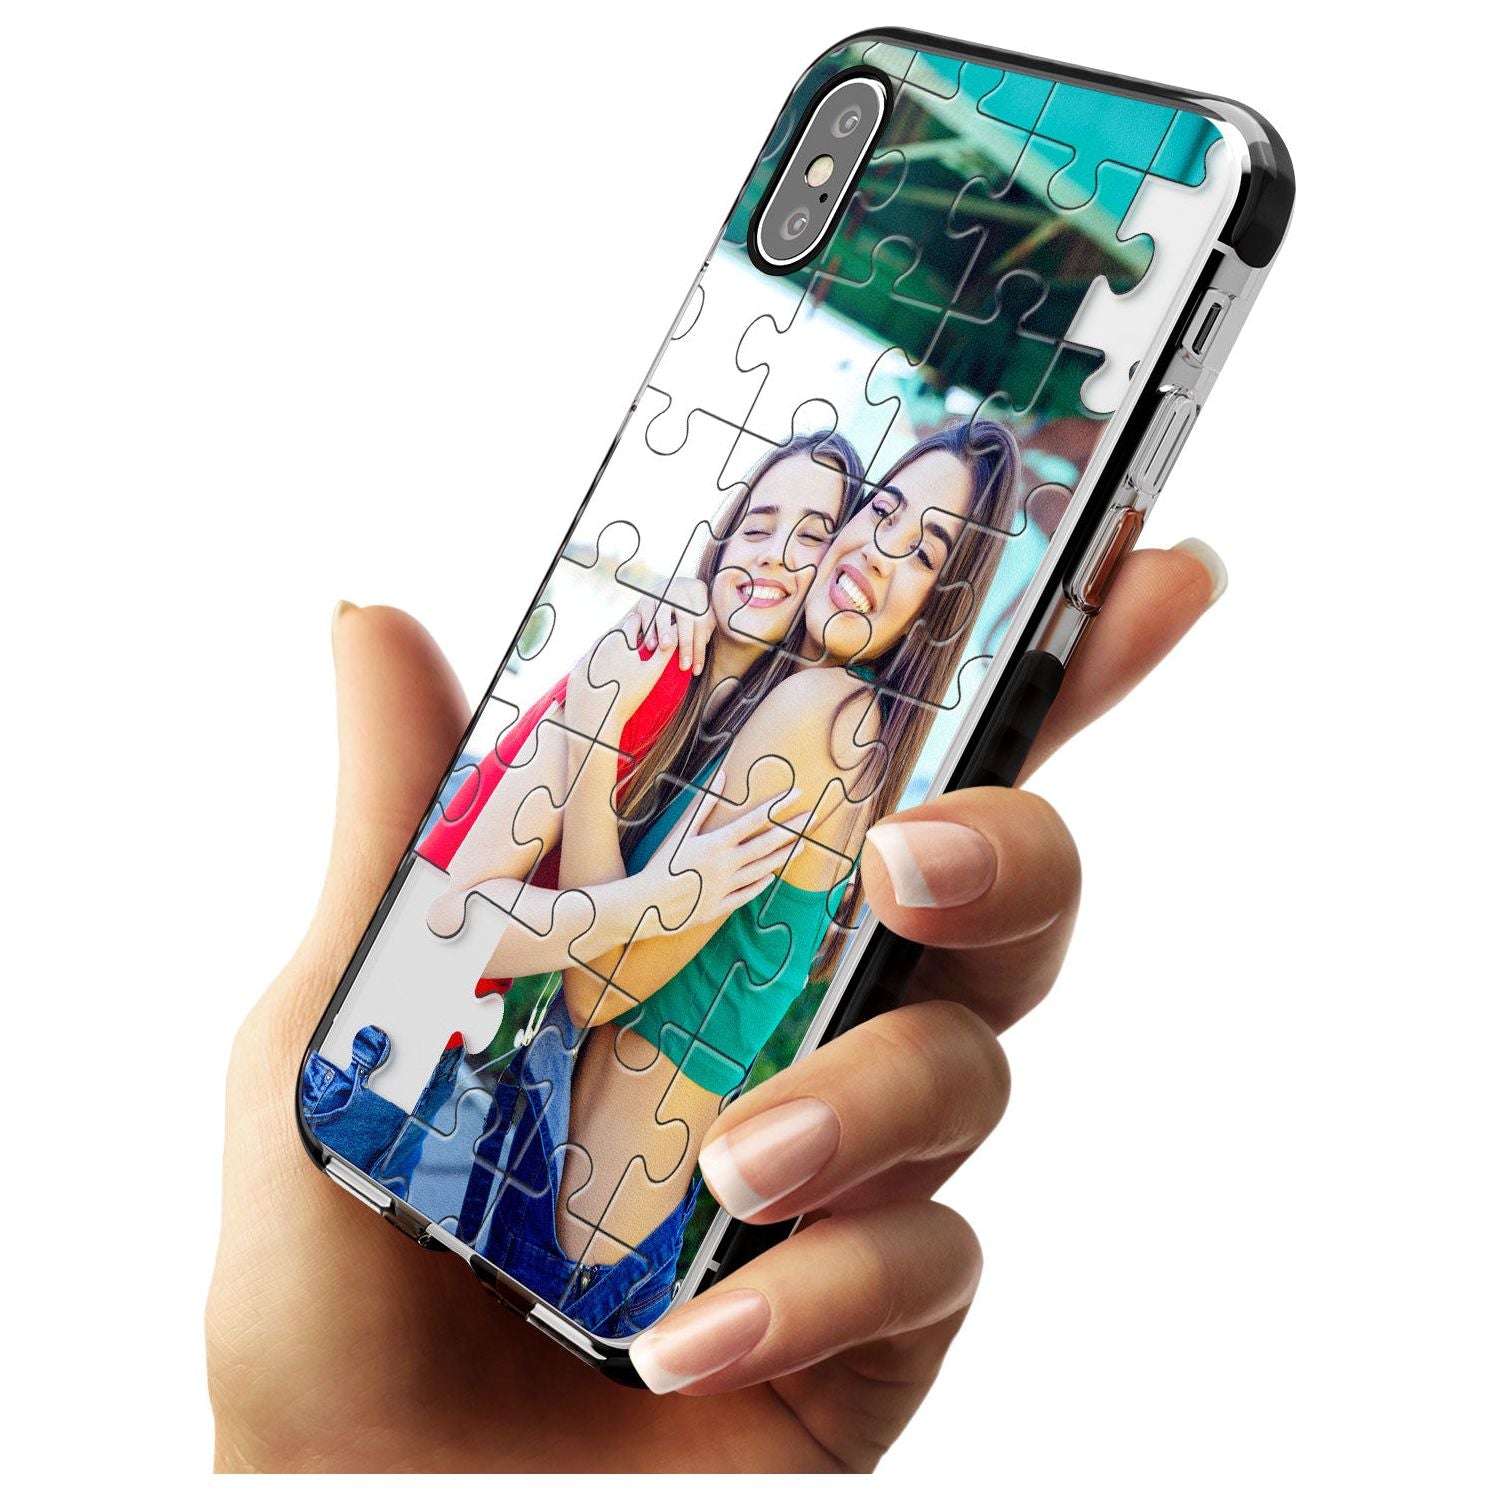 Personalised Jigsaw Puzzle Photo Black Impact Phone Case for iPhone X XS Max XR